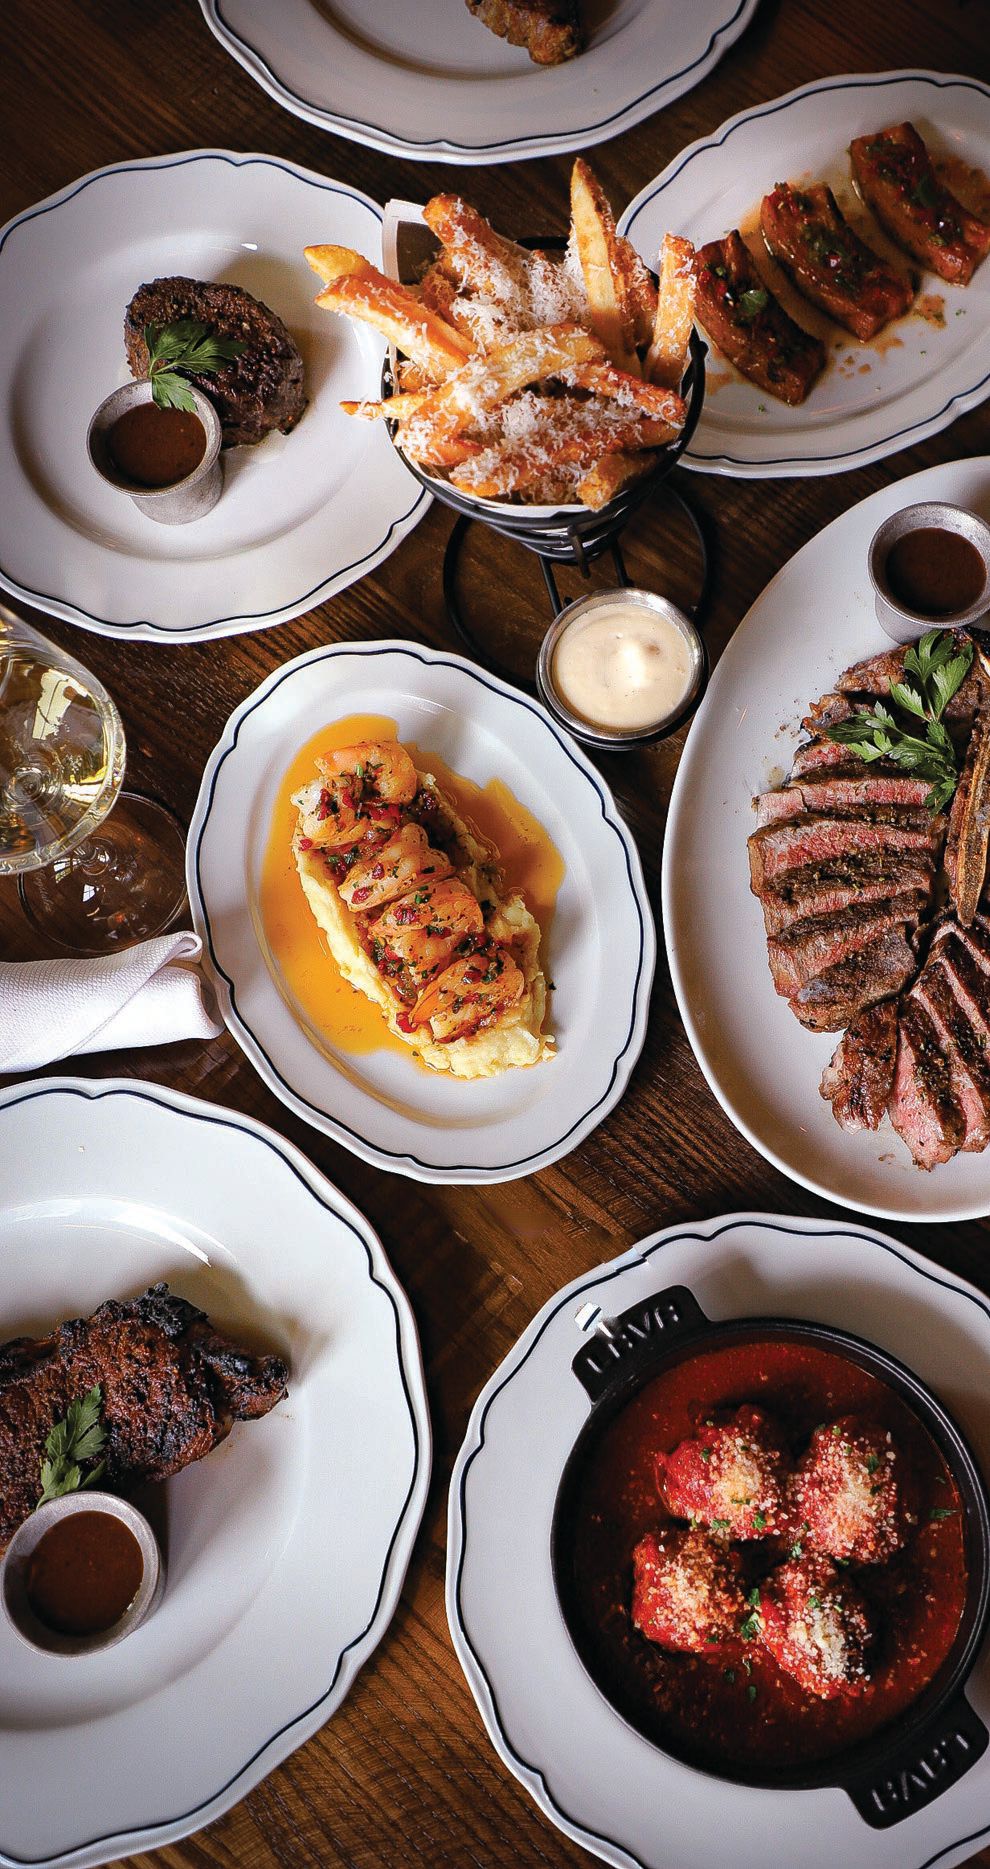 A selection of savory dishes at Sophia Steak Lake Forest PHOTO BY NEIL BURGER